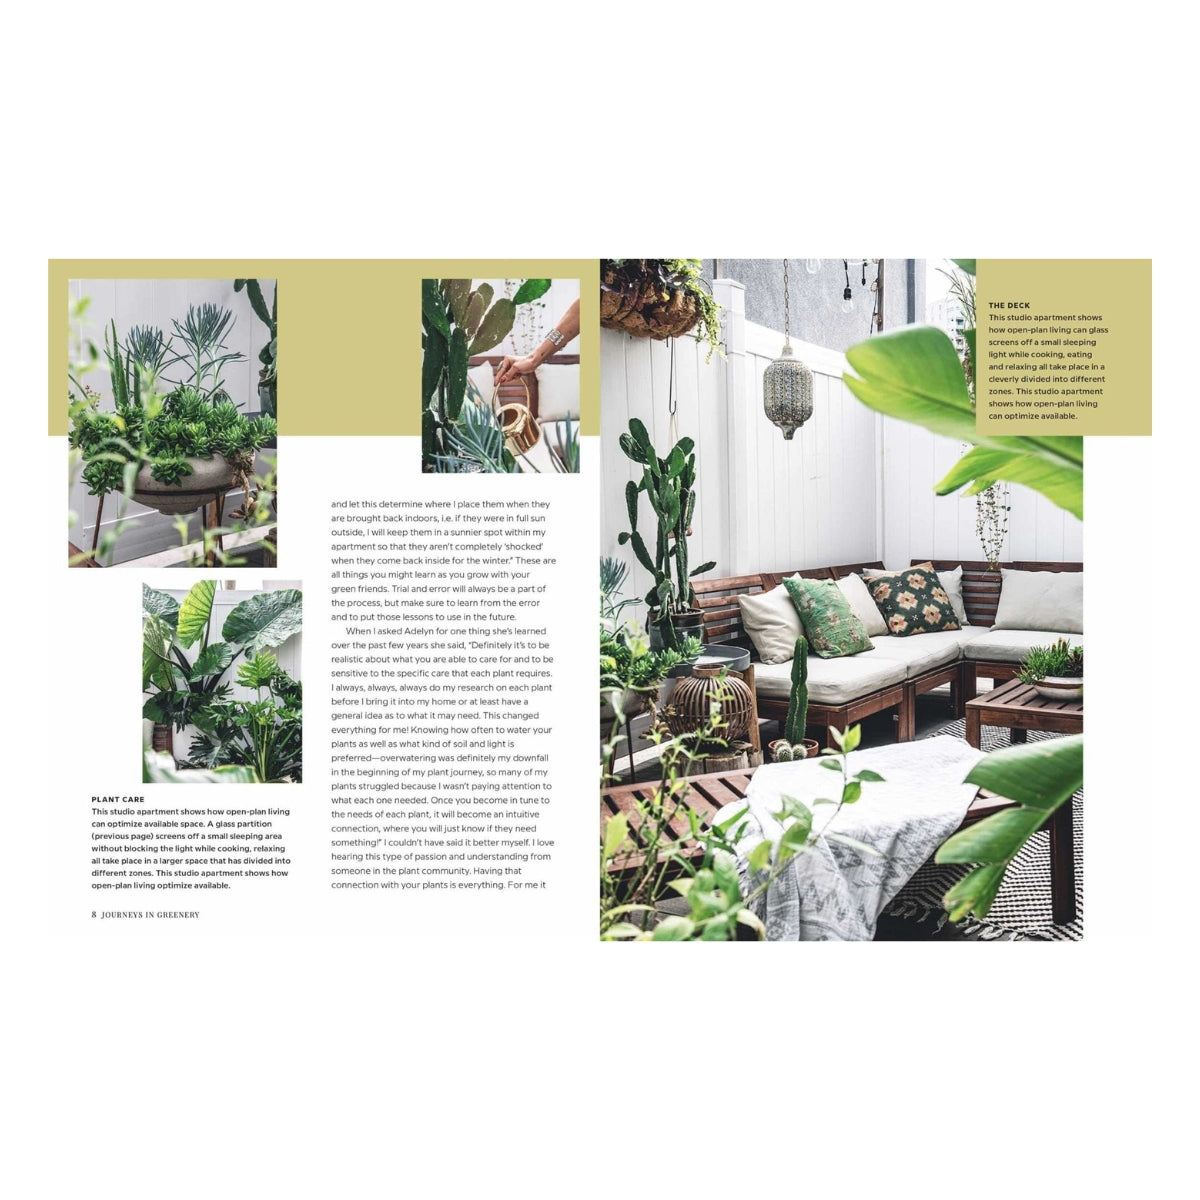 New Mags | Wild Interiors: Beautiful Plants in Beautiful Spaces - Bolighuset Werenberg